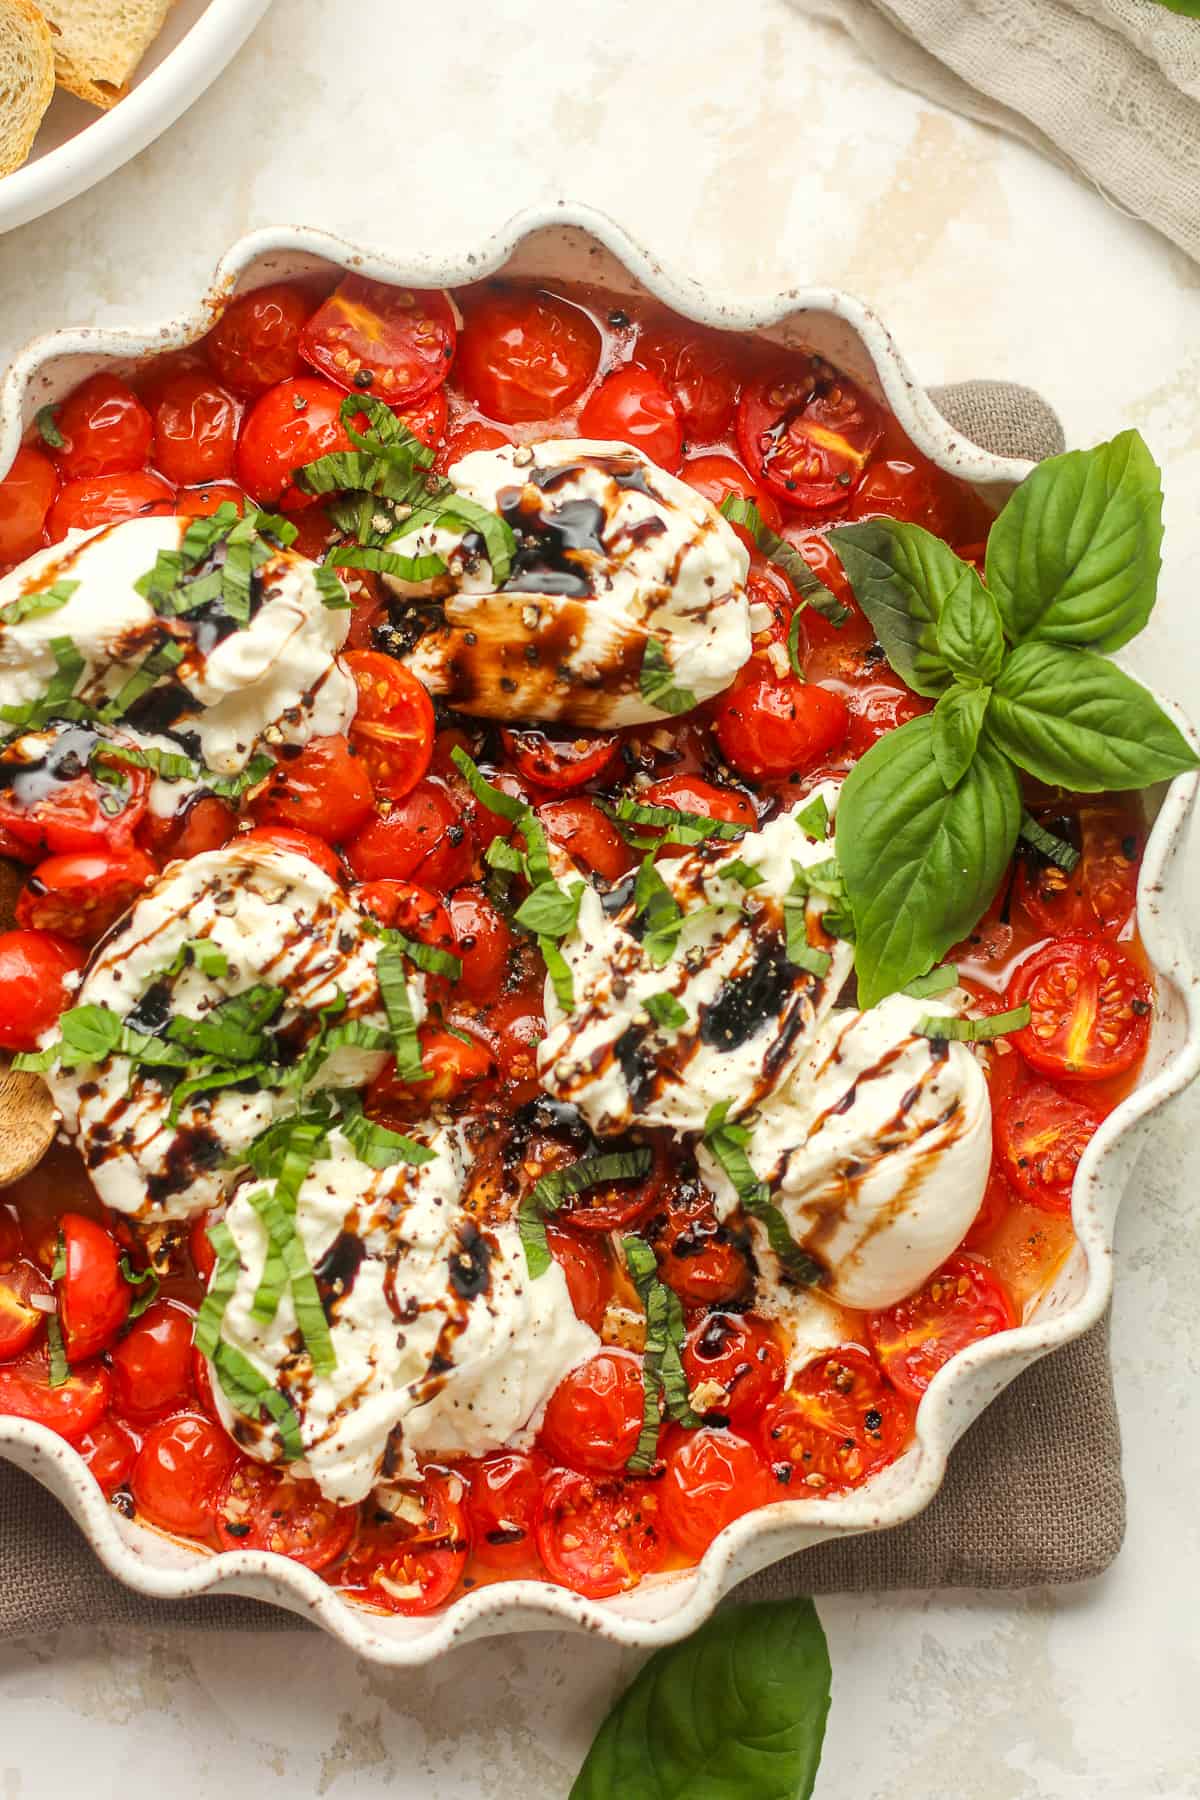 A dish of roasted tomatoes with warm burrata cheese and fresh basil.